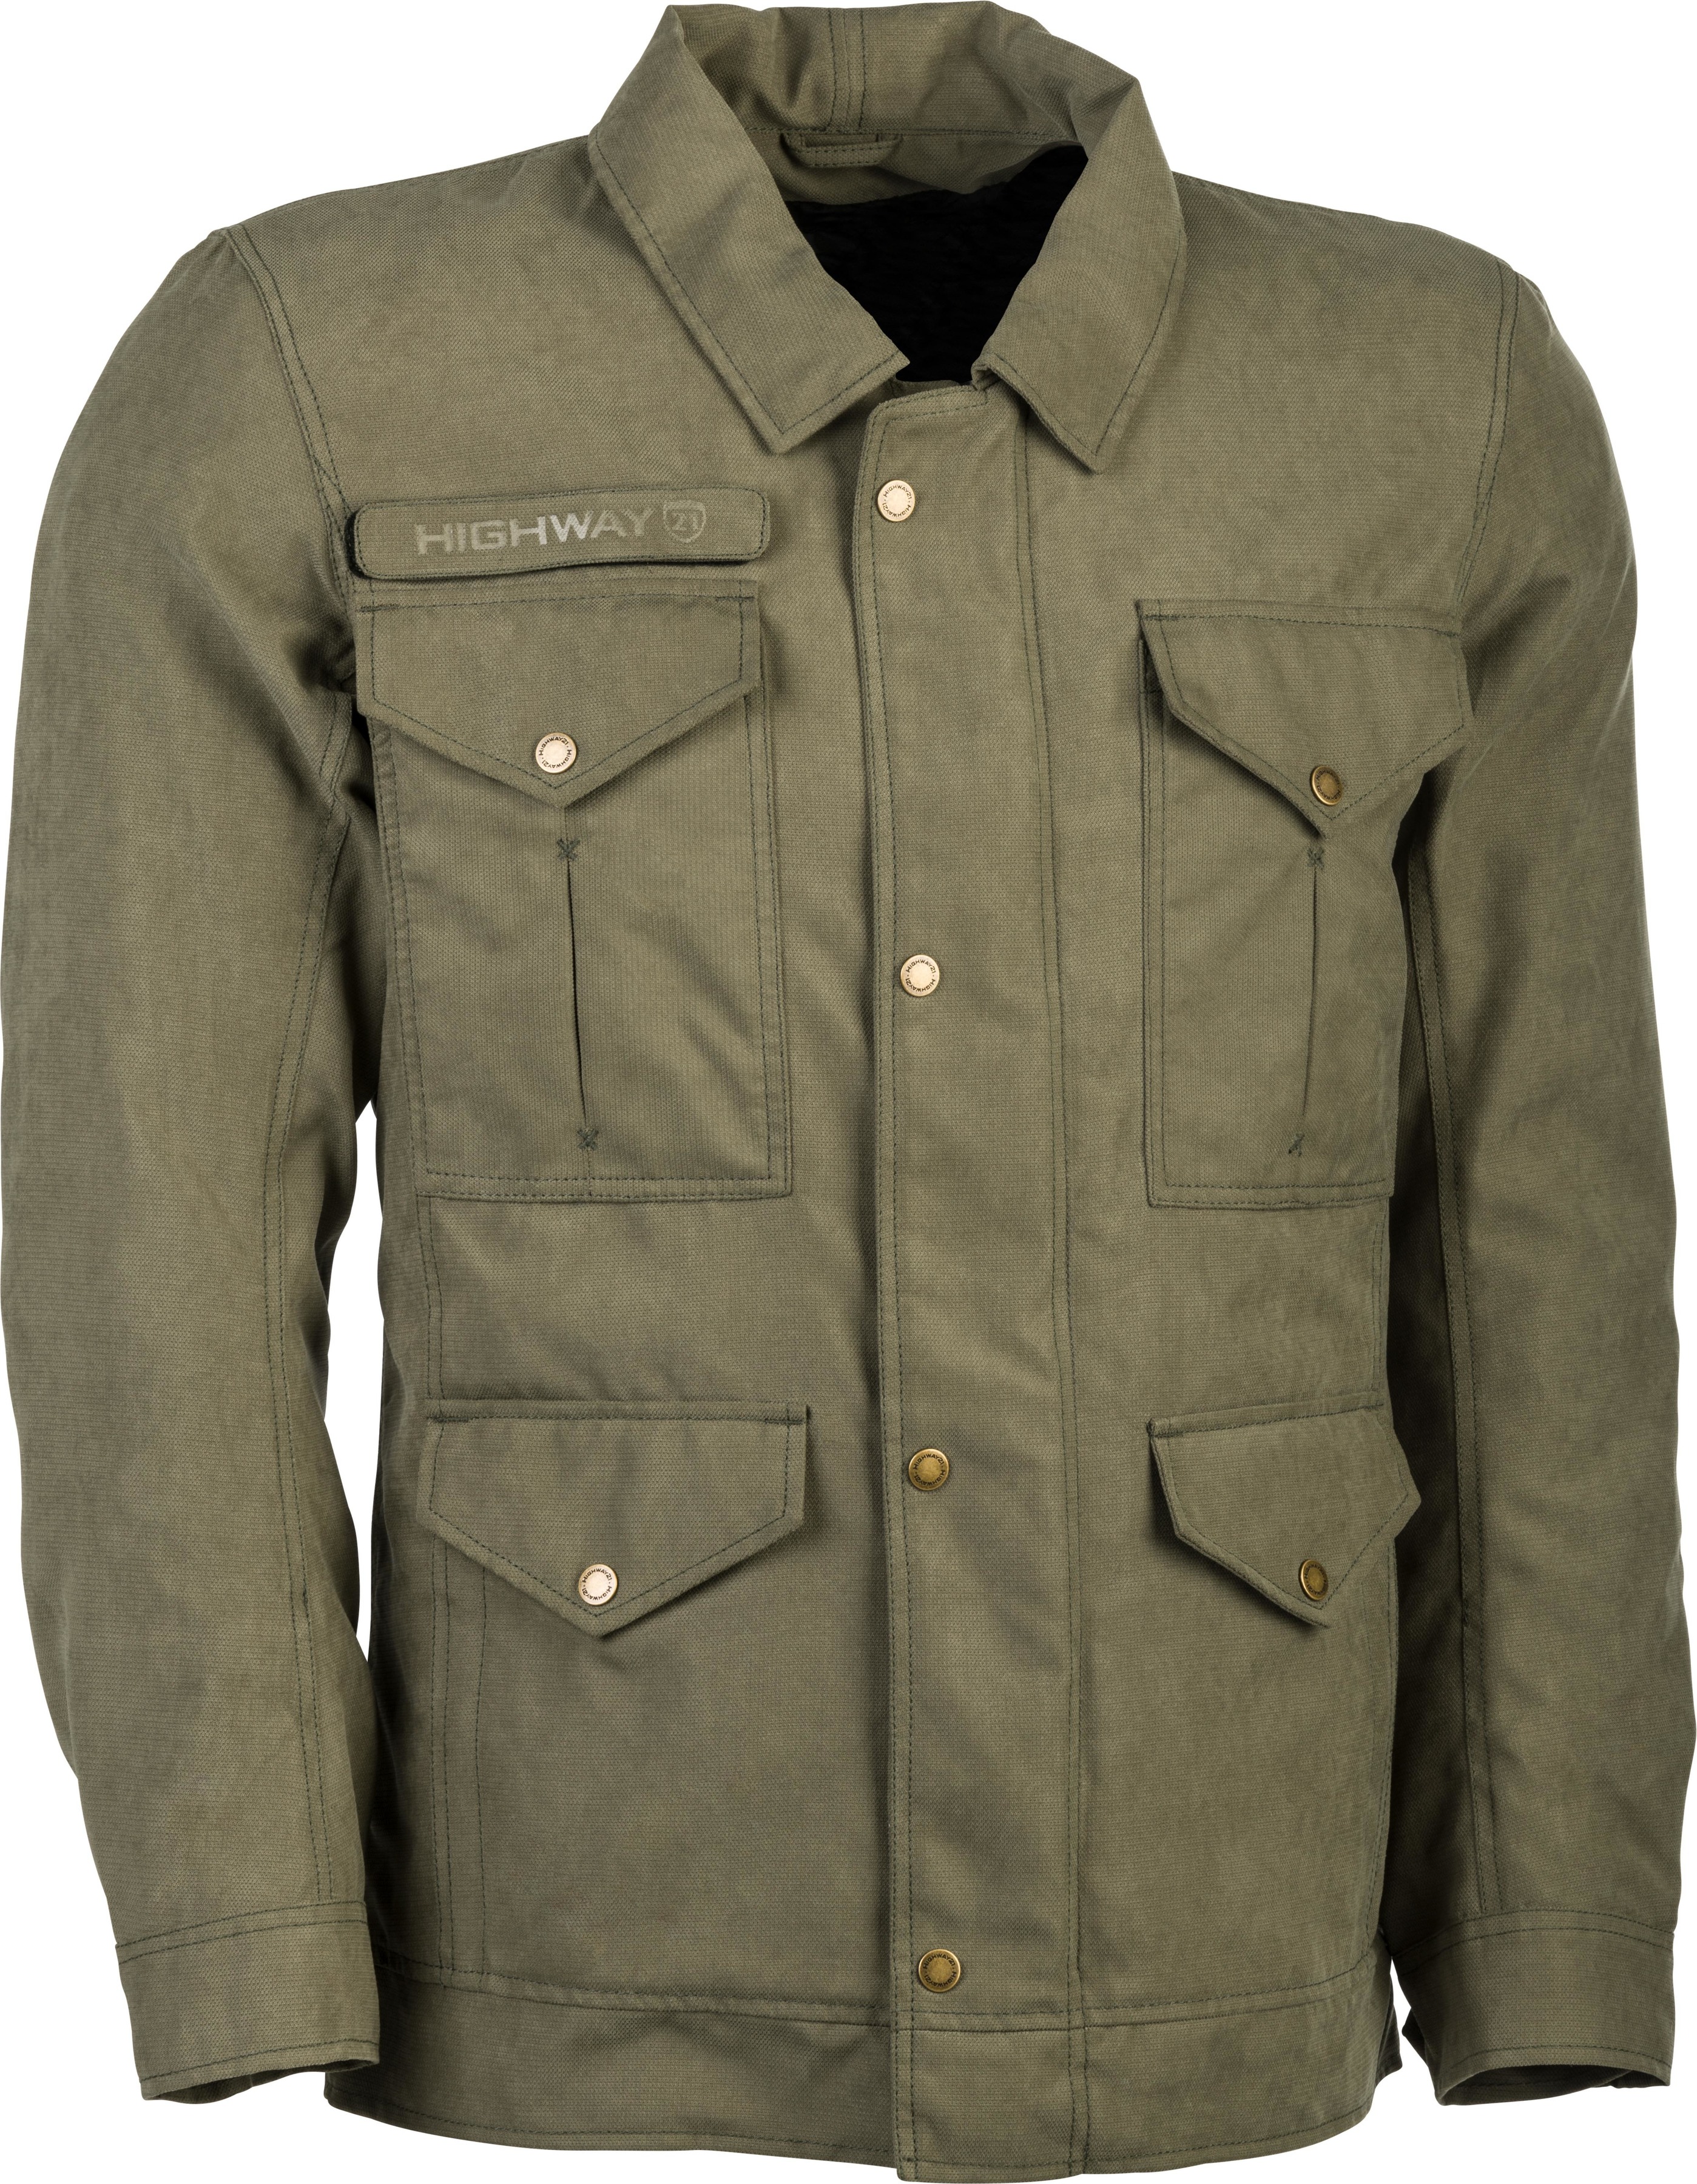 Winchester Riding Jacket Green 2X-Large - Click Image to Close